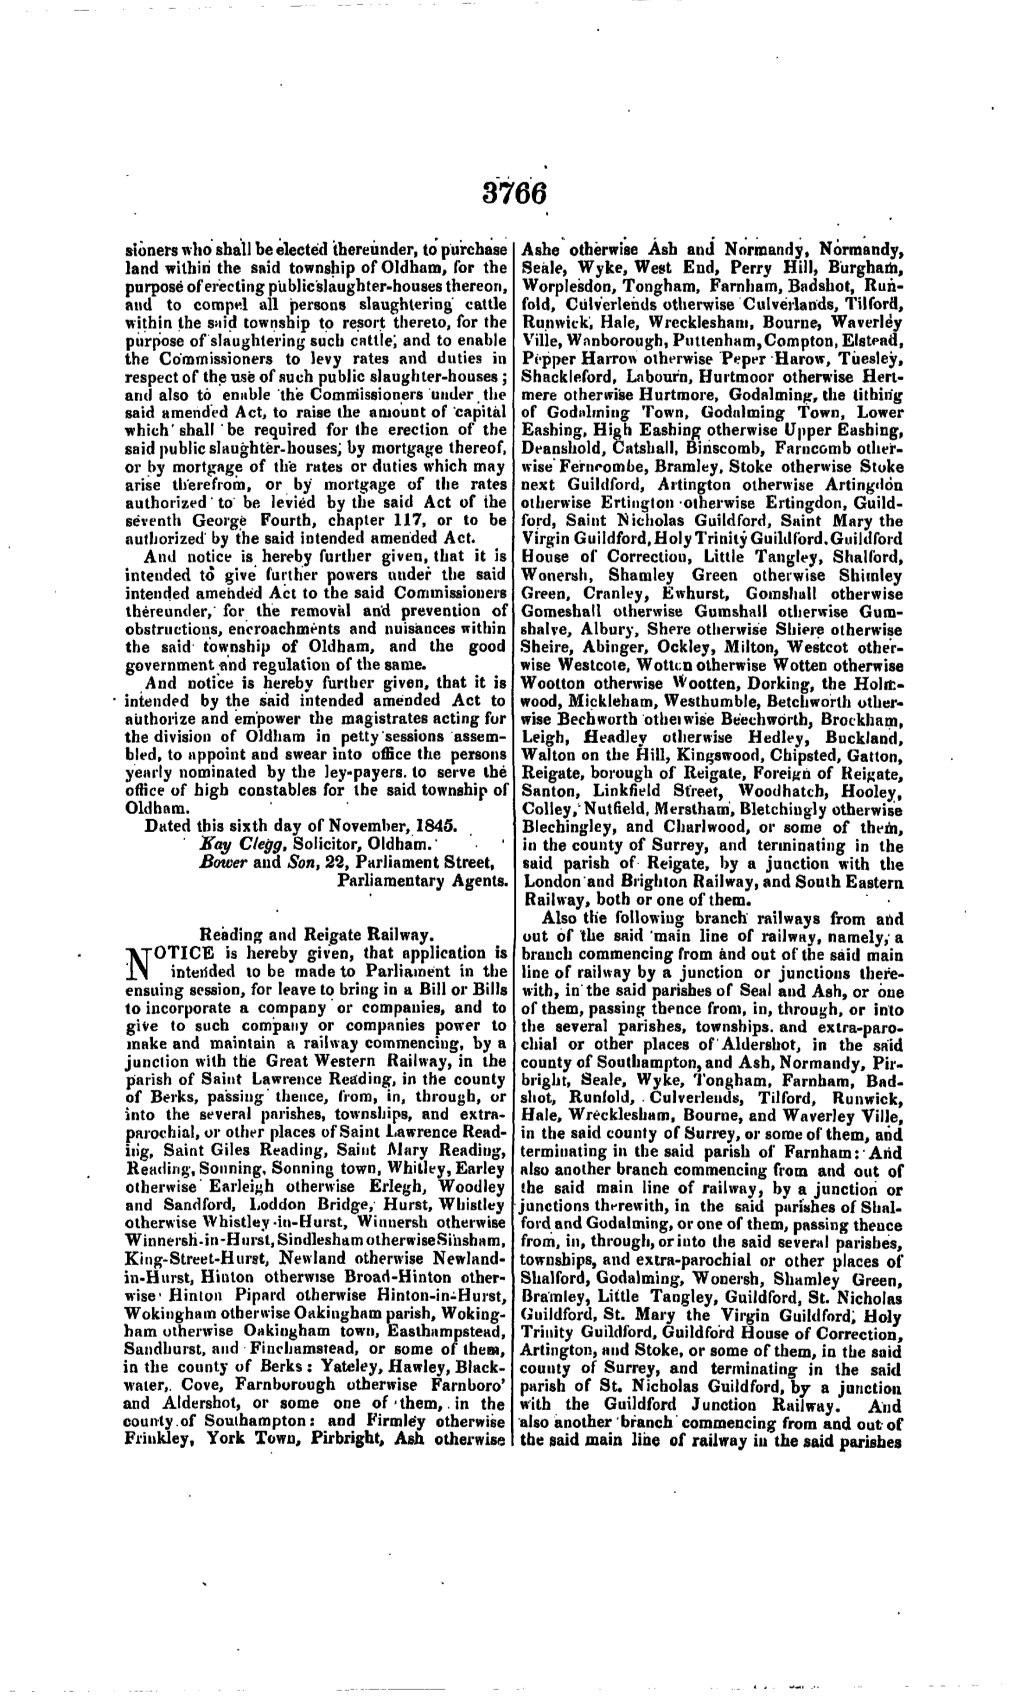 The London Gazette, Issue 20530, Page 3766